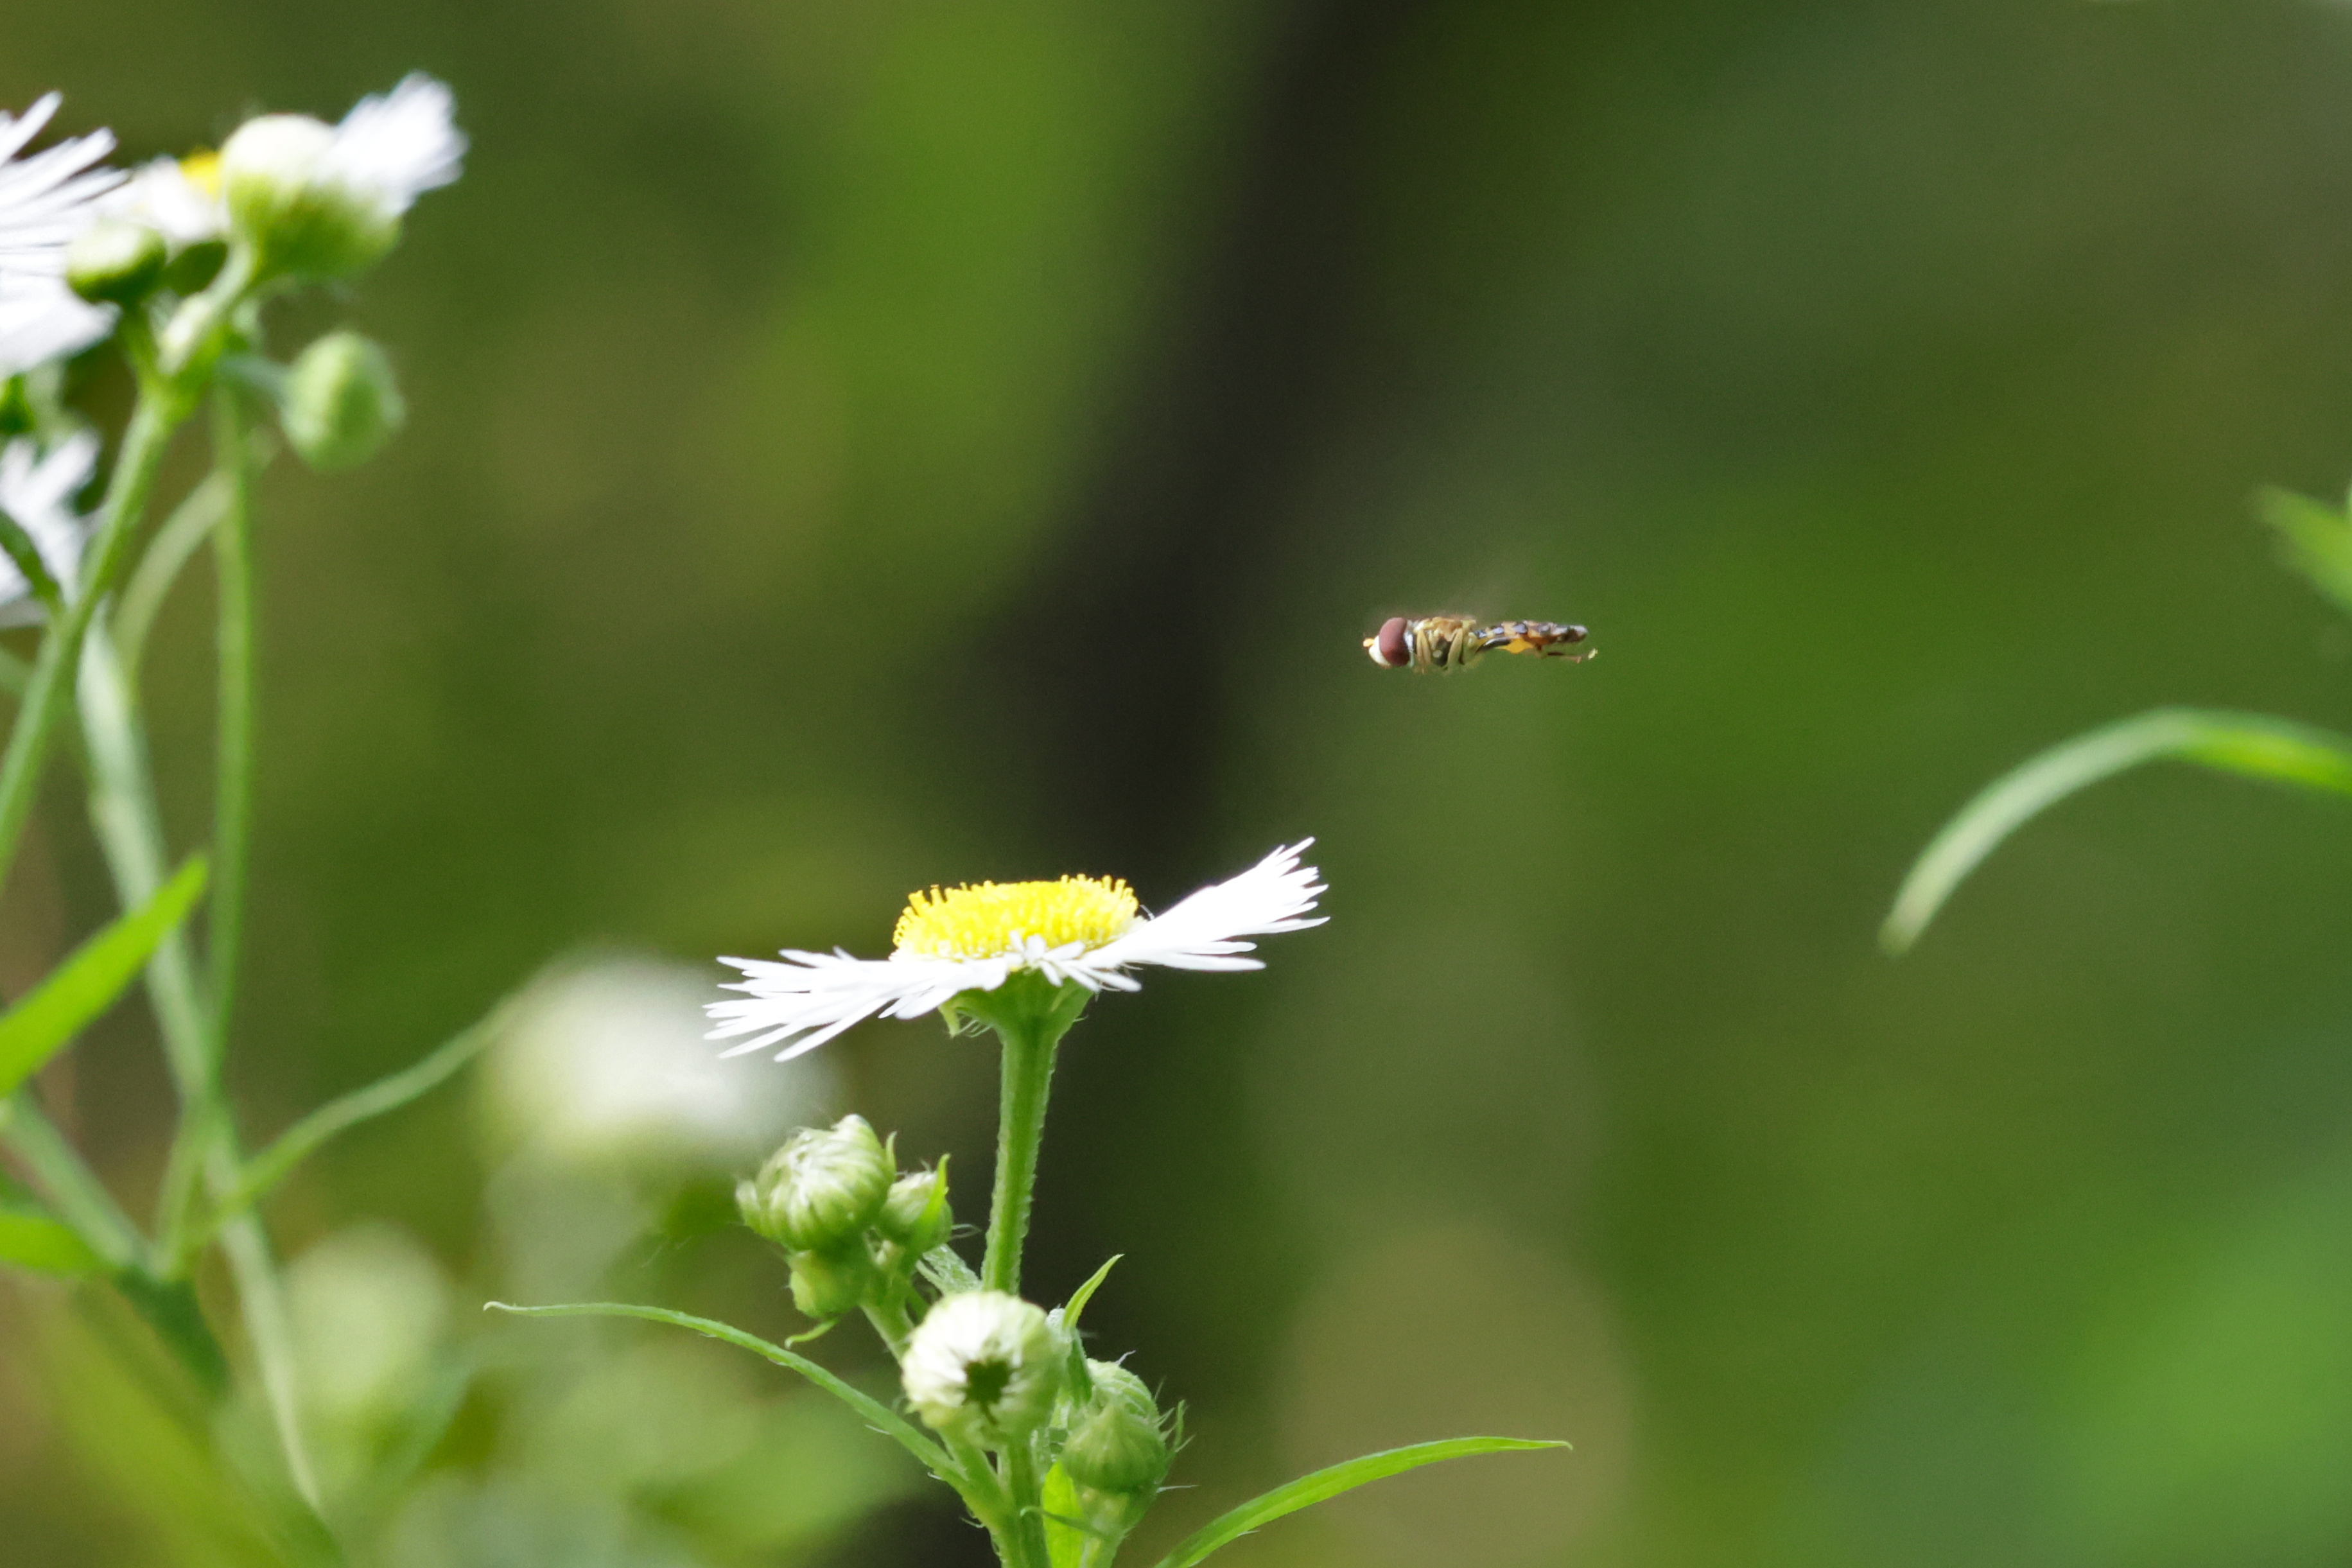 hoverfly hovering over a small aster flower